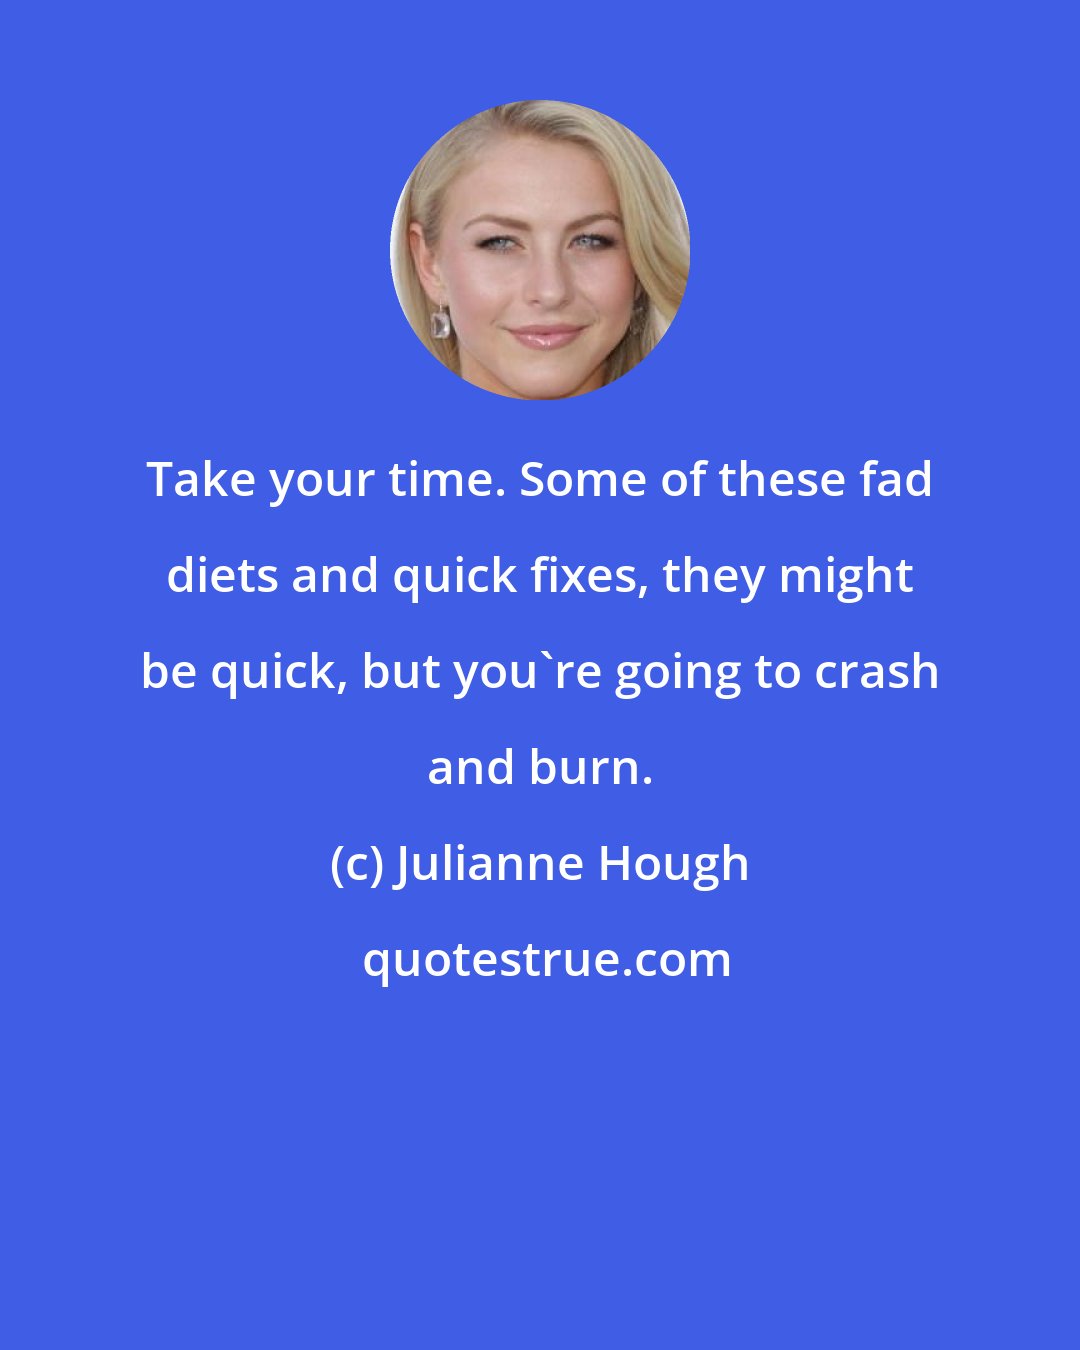 Julianne Hough: Take your time. Some of these fad diets and quick fixes, they might be quick, but you're going to crash and burn.